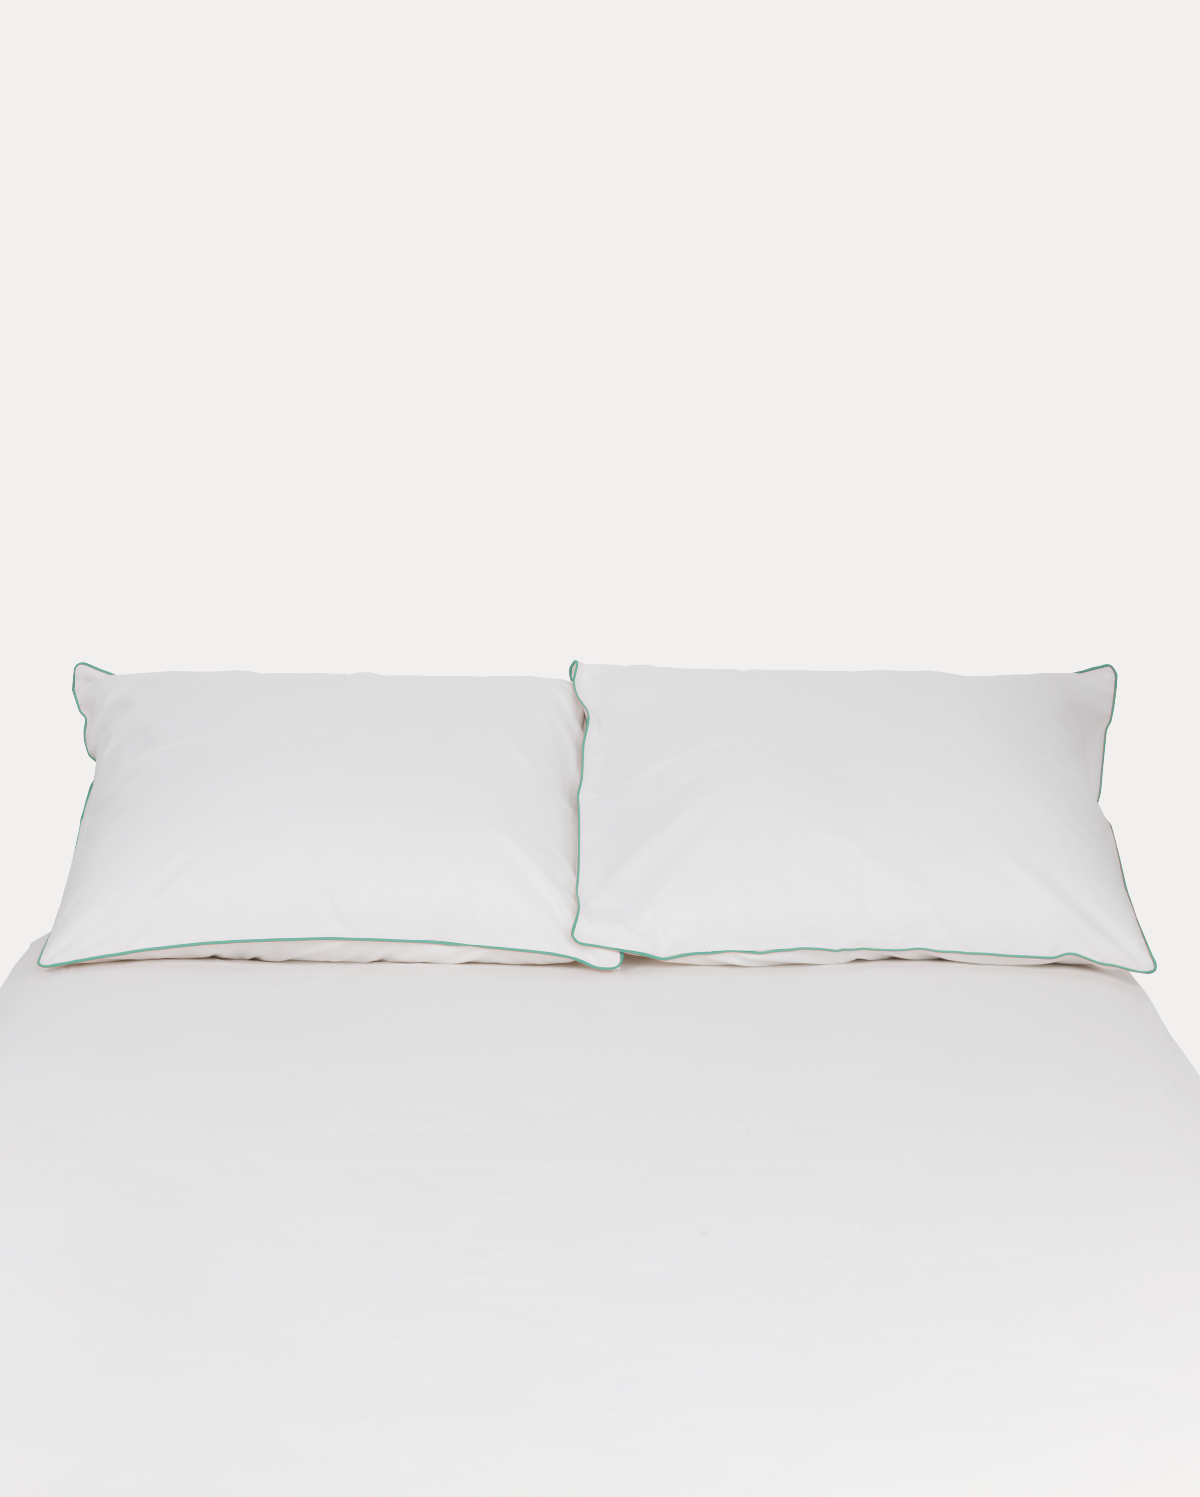 Classic Percale - Duvet Cover Set - White with Jade Green Piped Edge